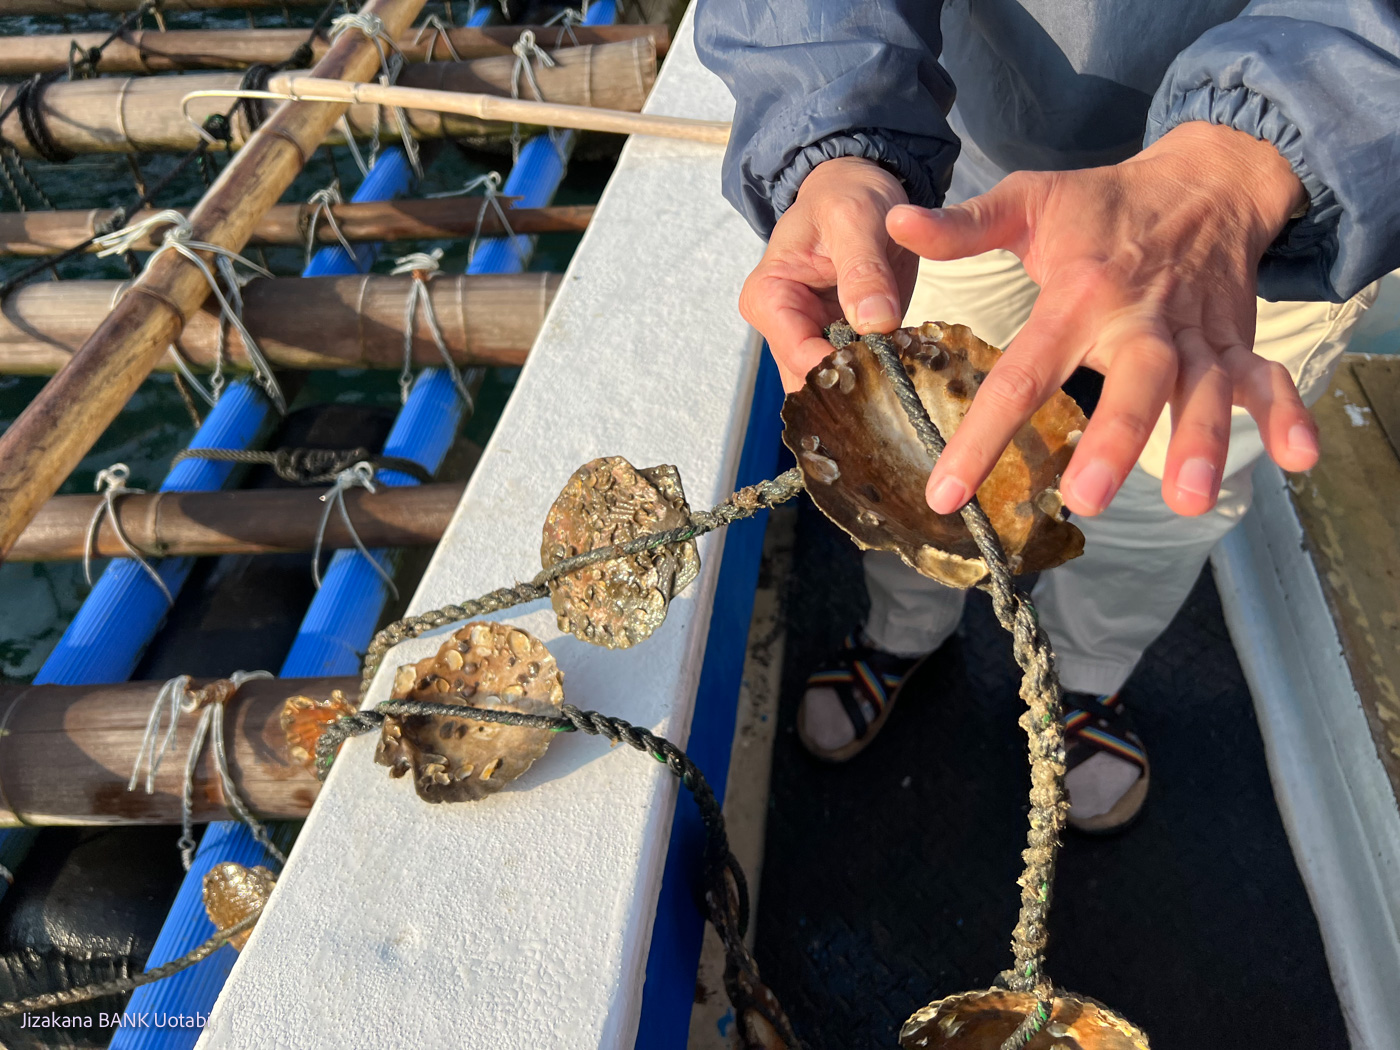 Itoshima Oyster farm / 地魚BANK うお旅 糸島の牡蠣養殖